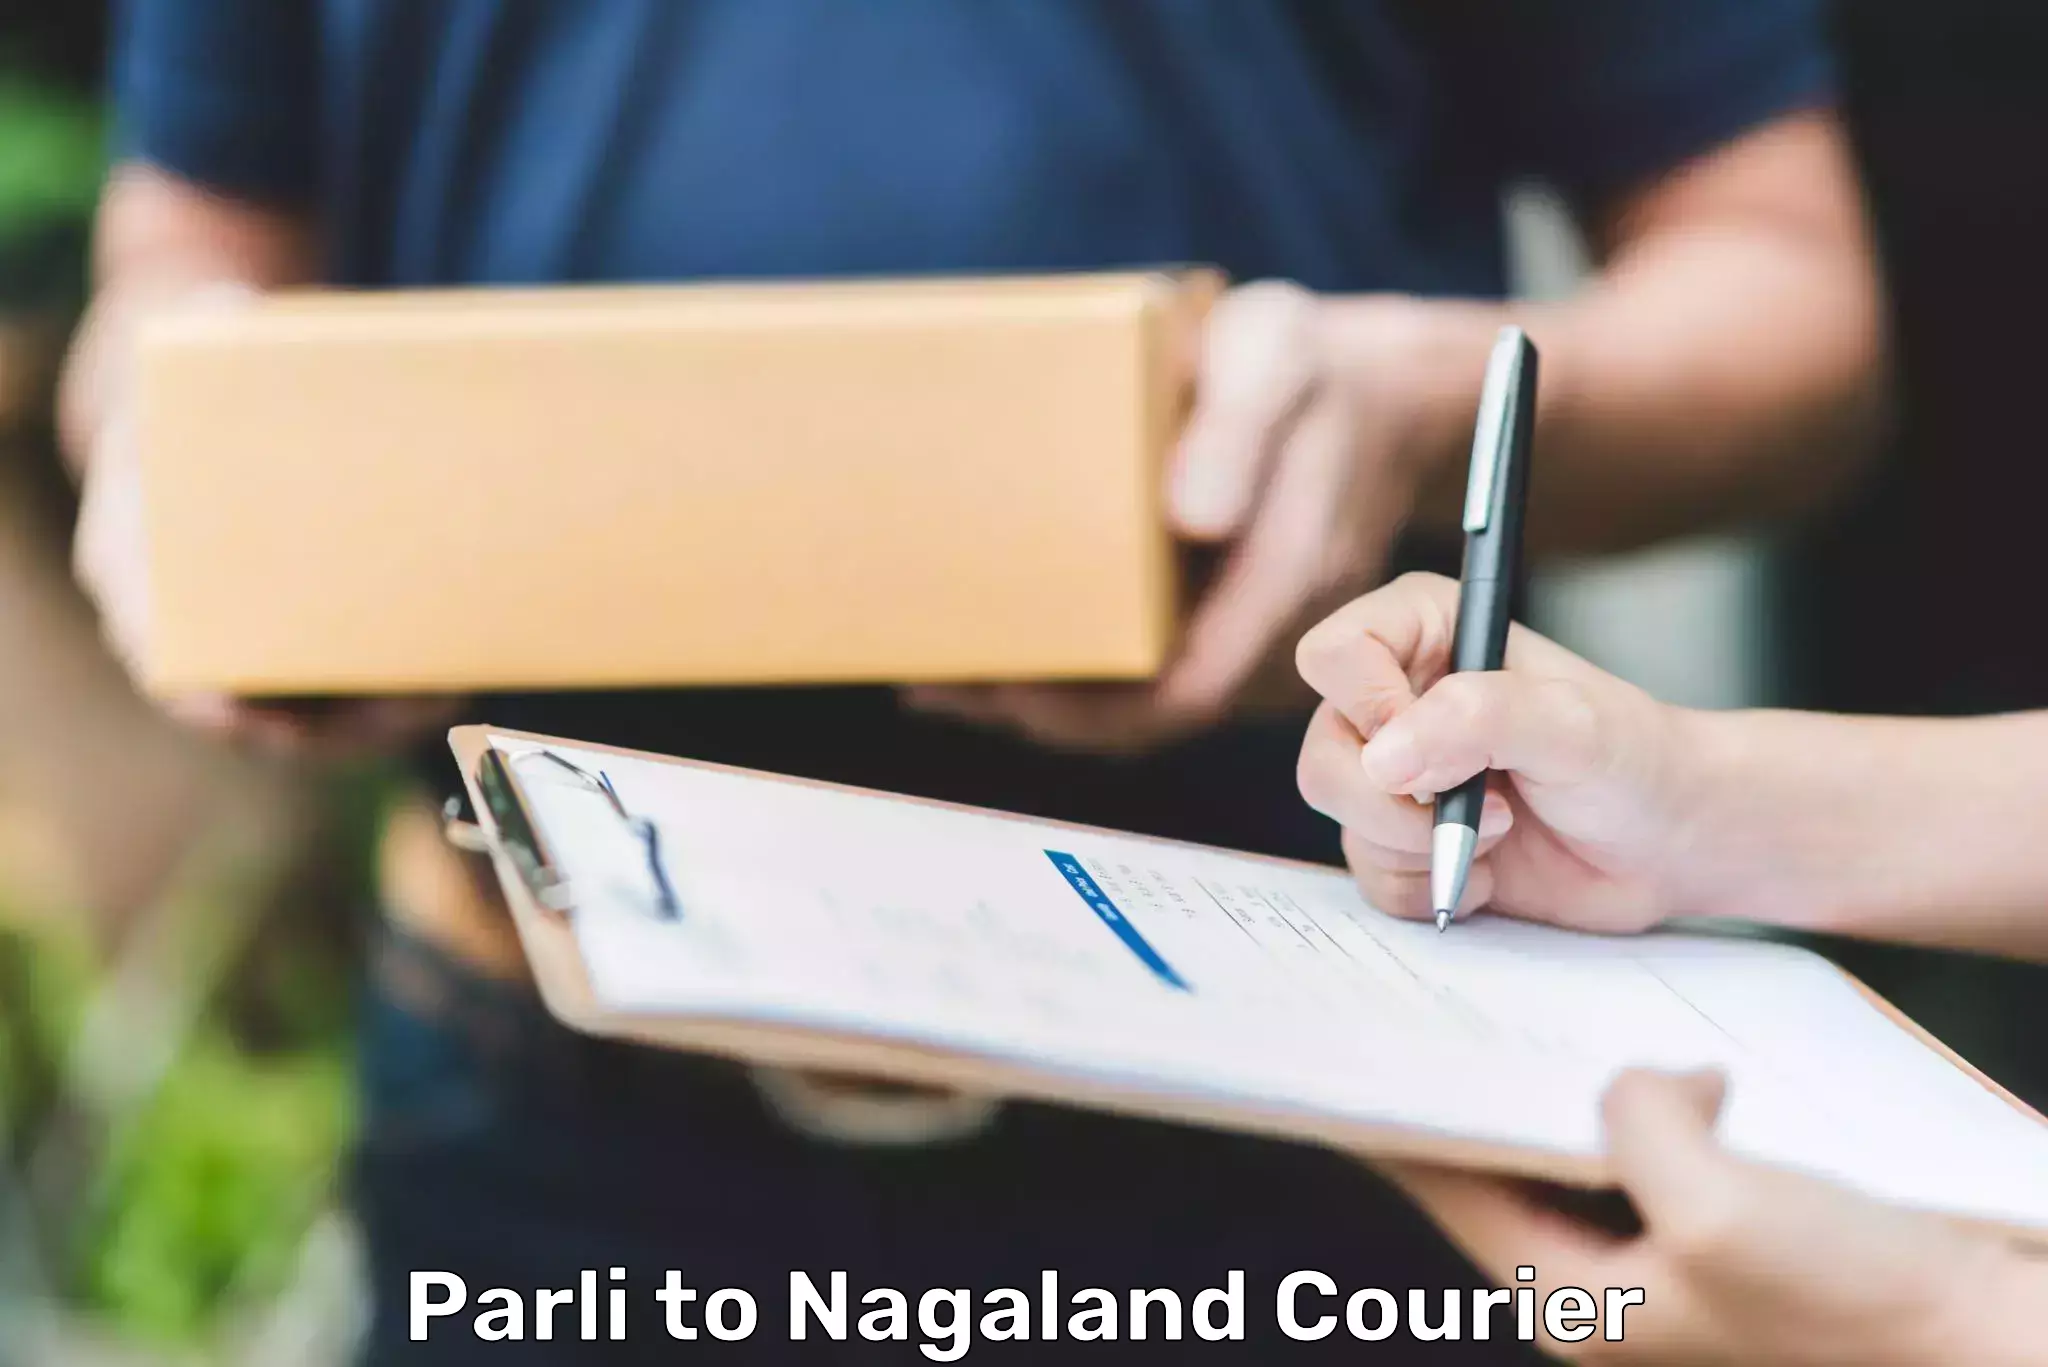 Next-day delivery options Parli to Nagaland